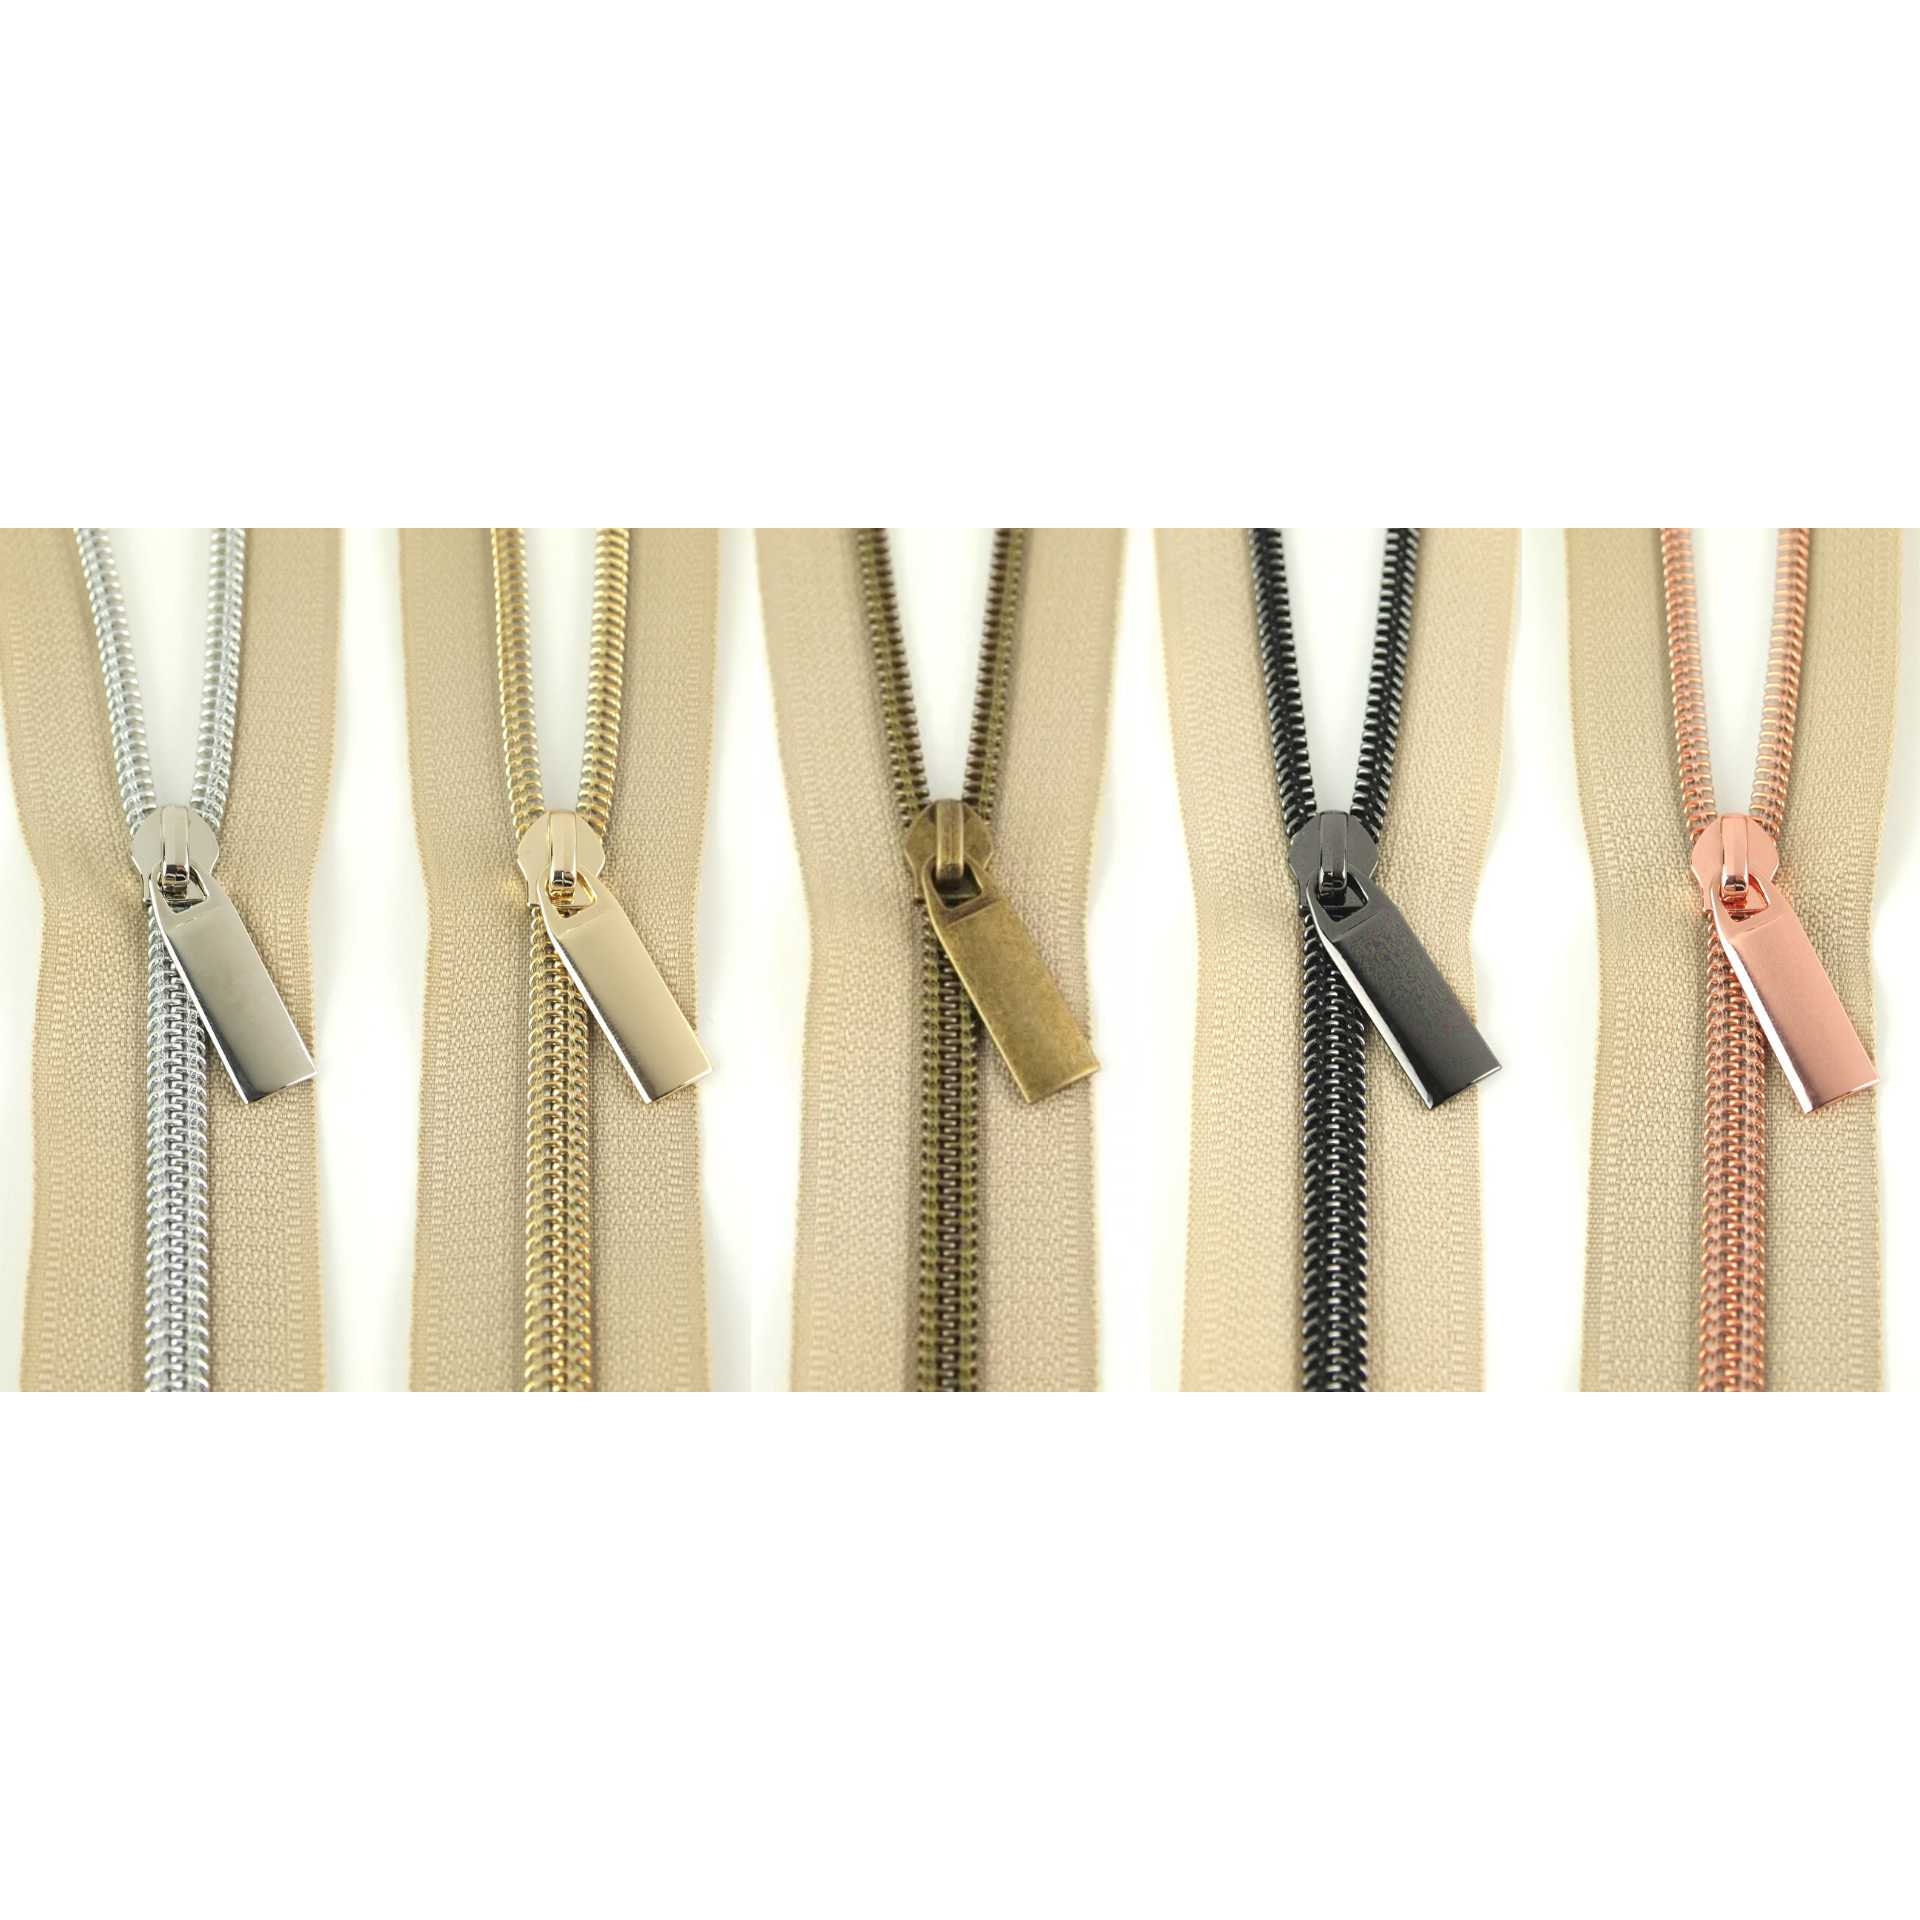 Brown #5 Nylon Coil Zippers: 3 Yards with 9 Pulls – Three Little